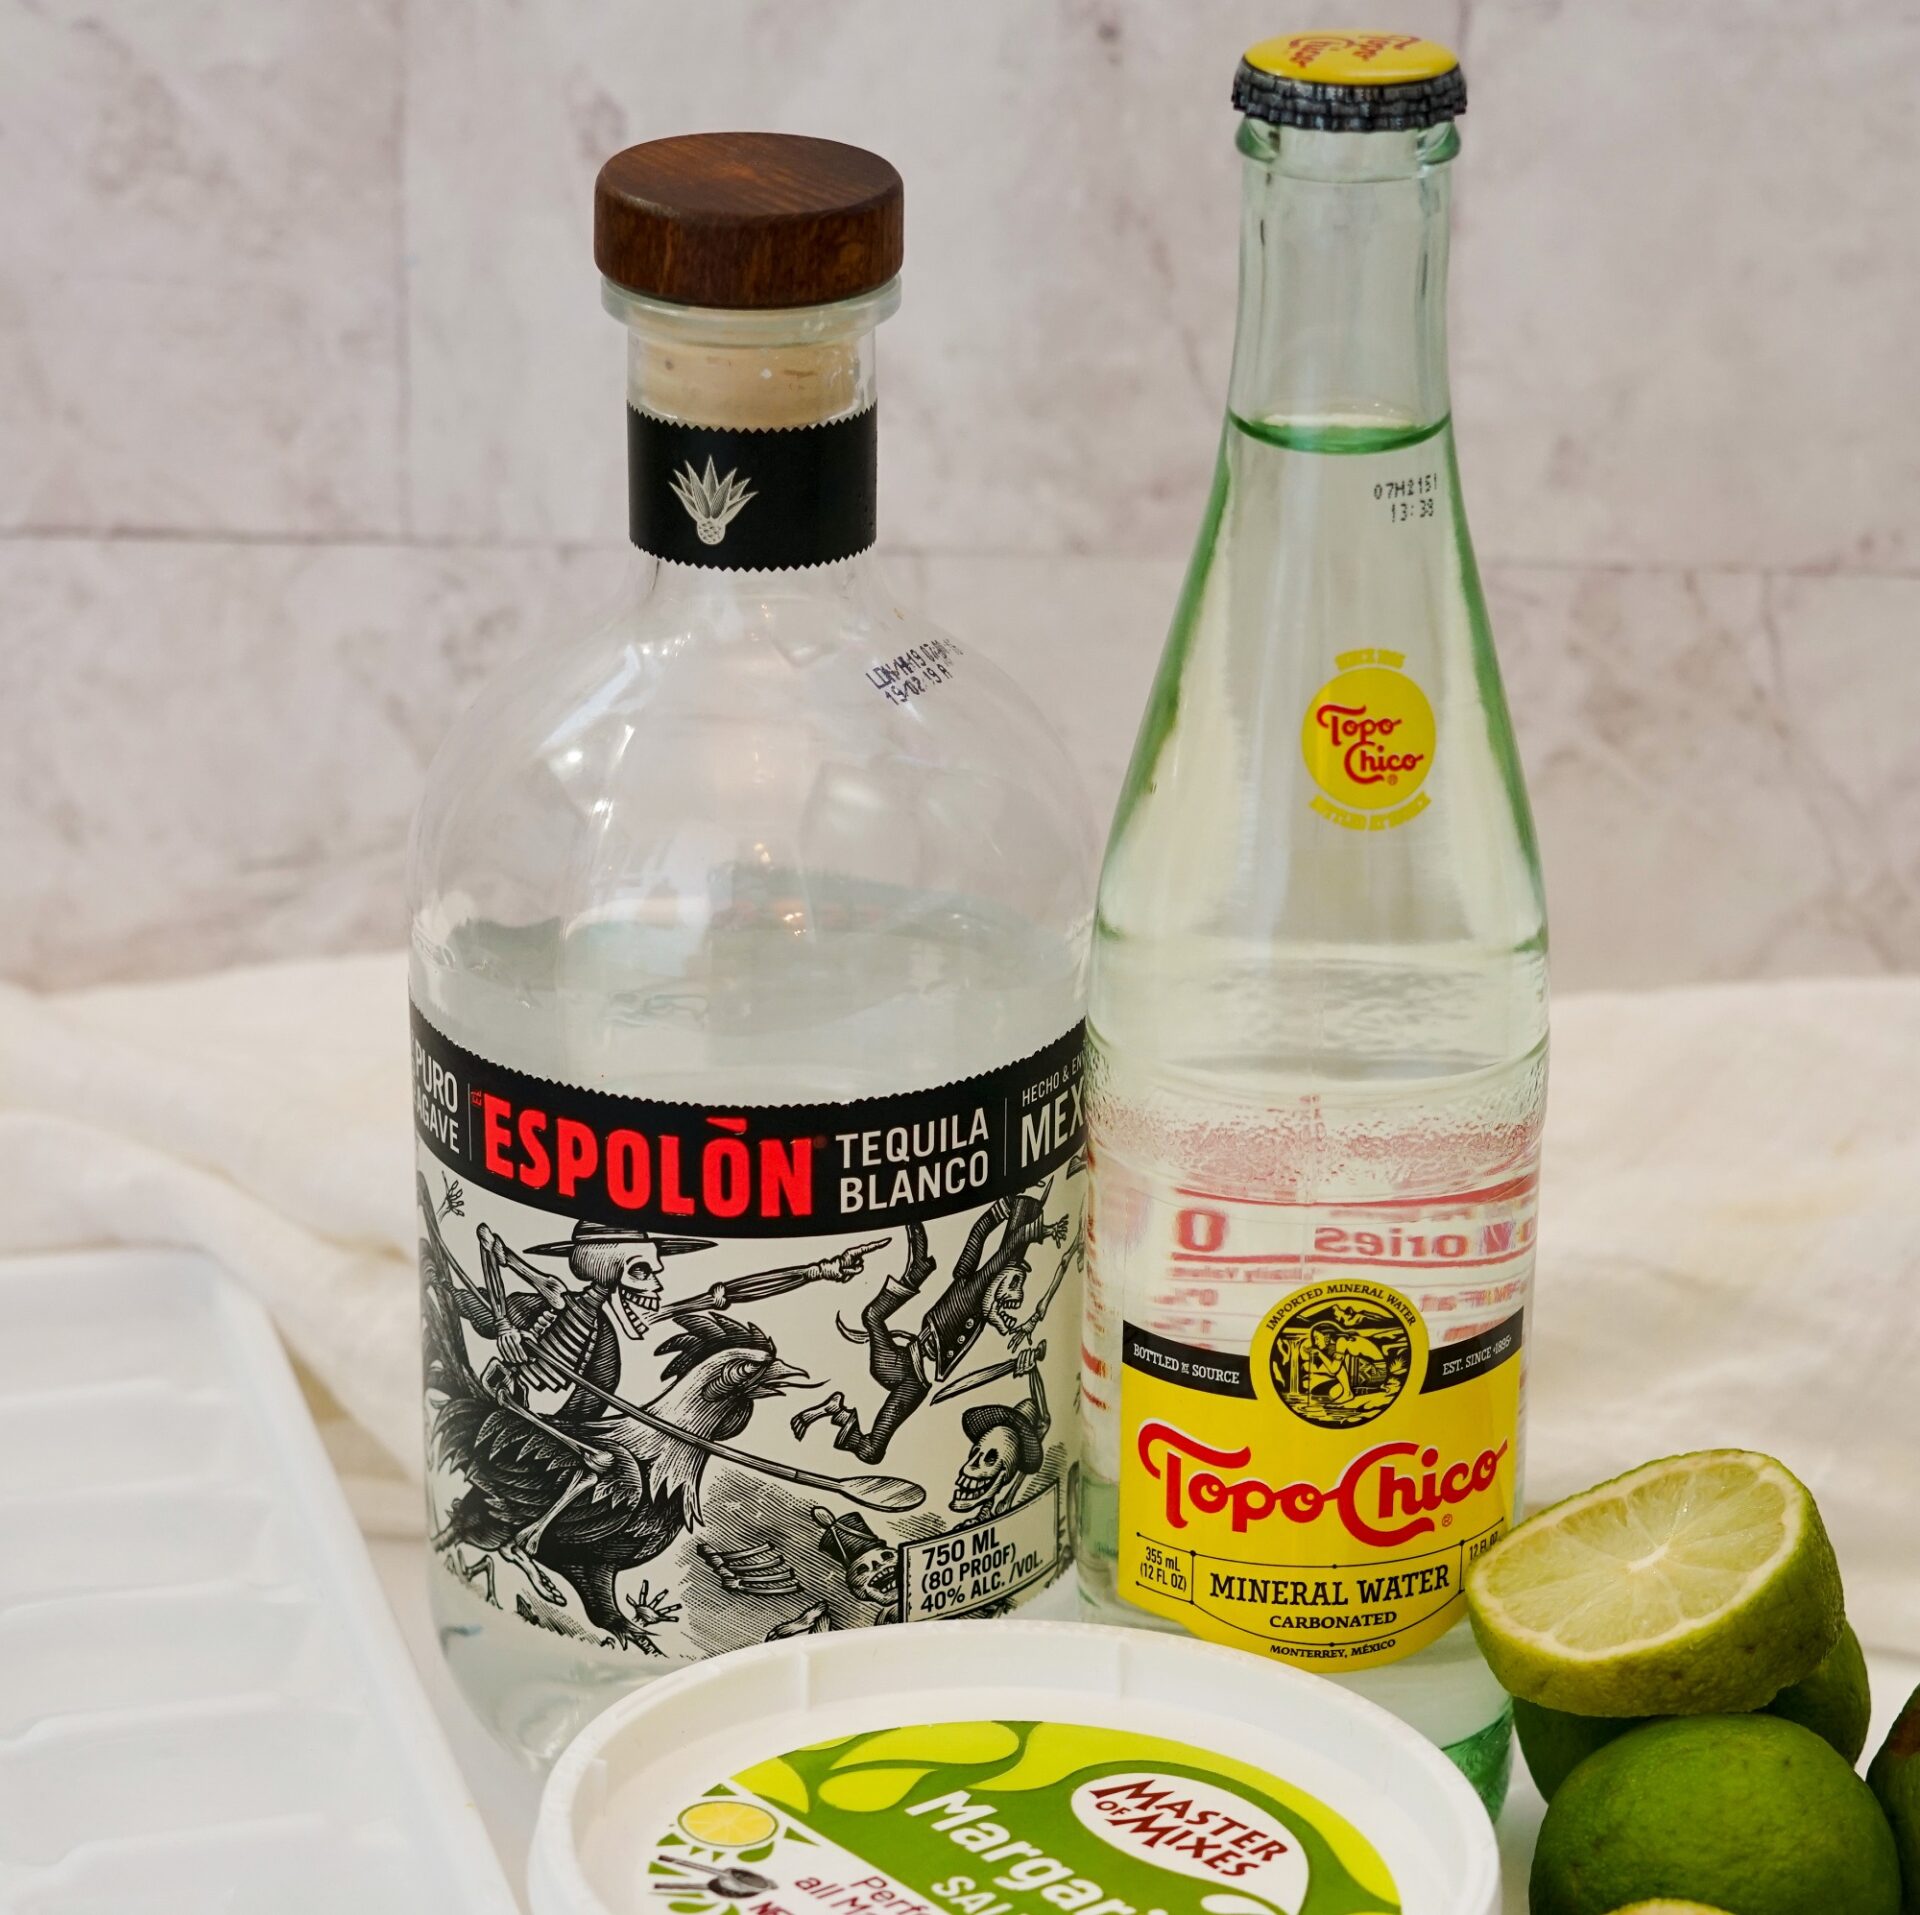 Bottle of Espolòn blanco tequila with Topo Chico mineral water.